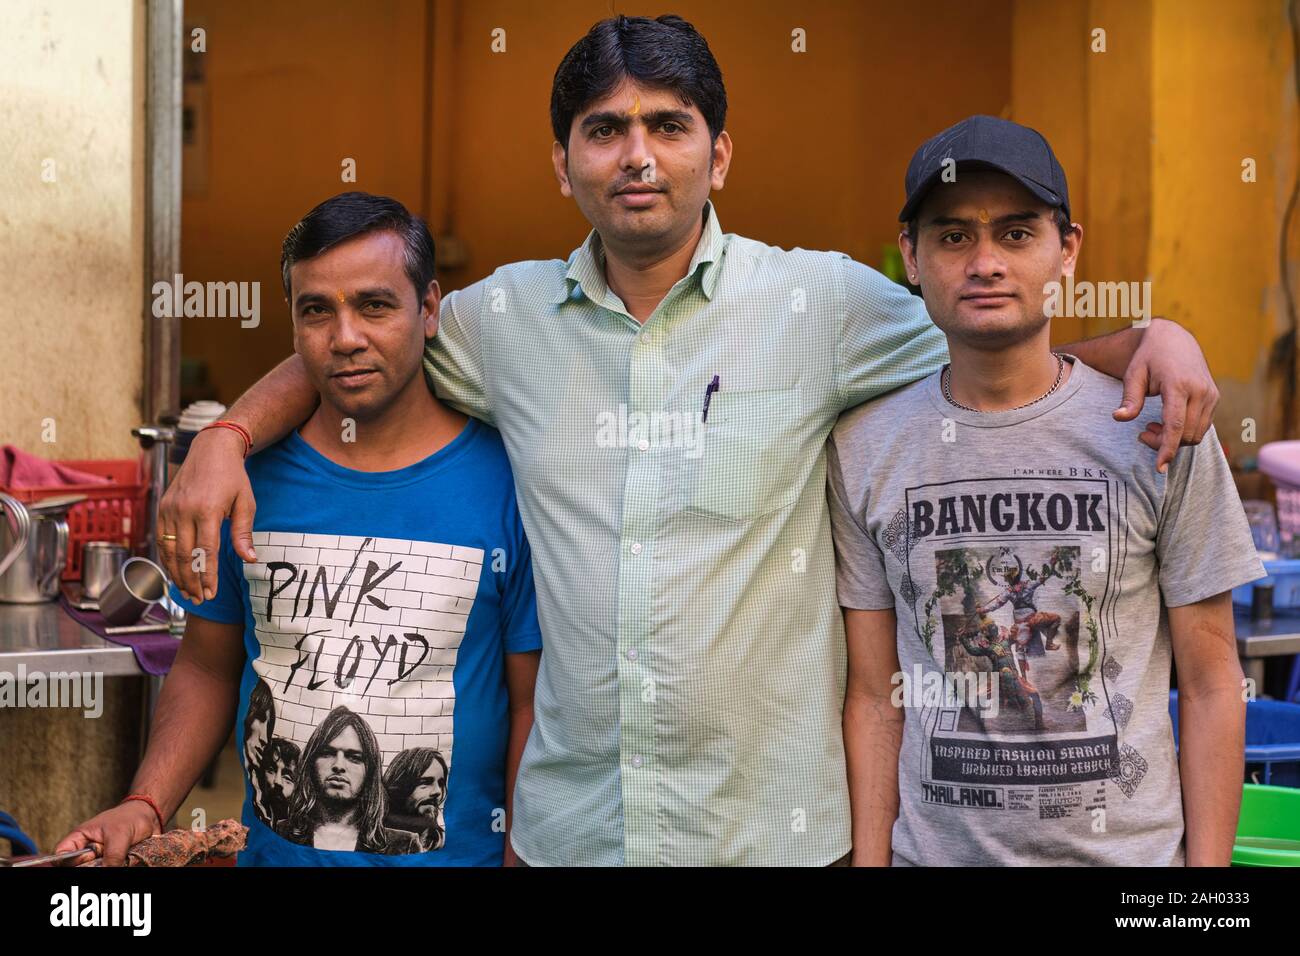 Outside a small Indian restaurant in Pahurat / Phahurat ('Little India'), Bangkok, Thailand, two employees in natty T-shirts flank an Indian customer Stock Photo